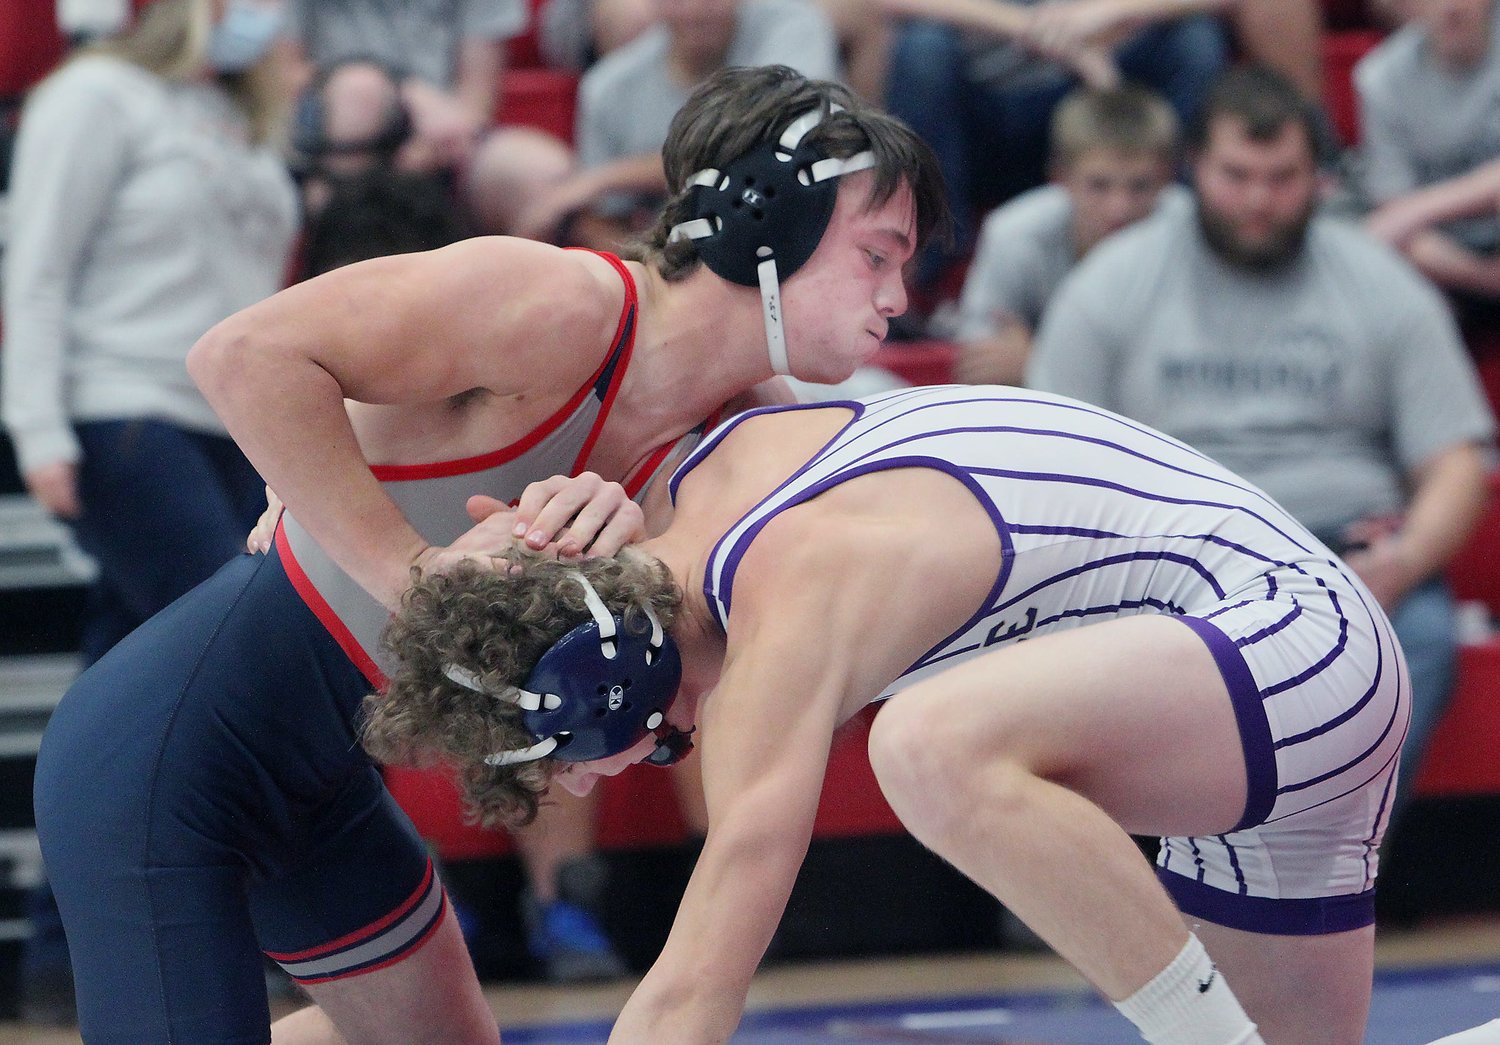 Moberly 138-pound wrestler Gage St. Clair (left) lost his Tuesday match to a Mexico wrestler by a technical fall, and the Spartans team returned home with a tough 40-39 loss.